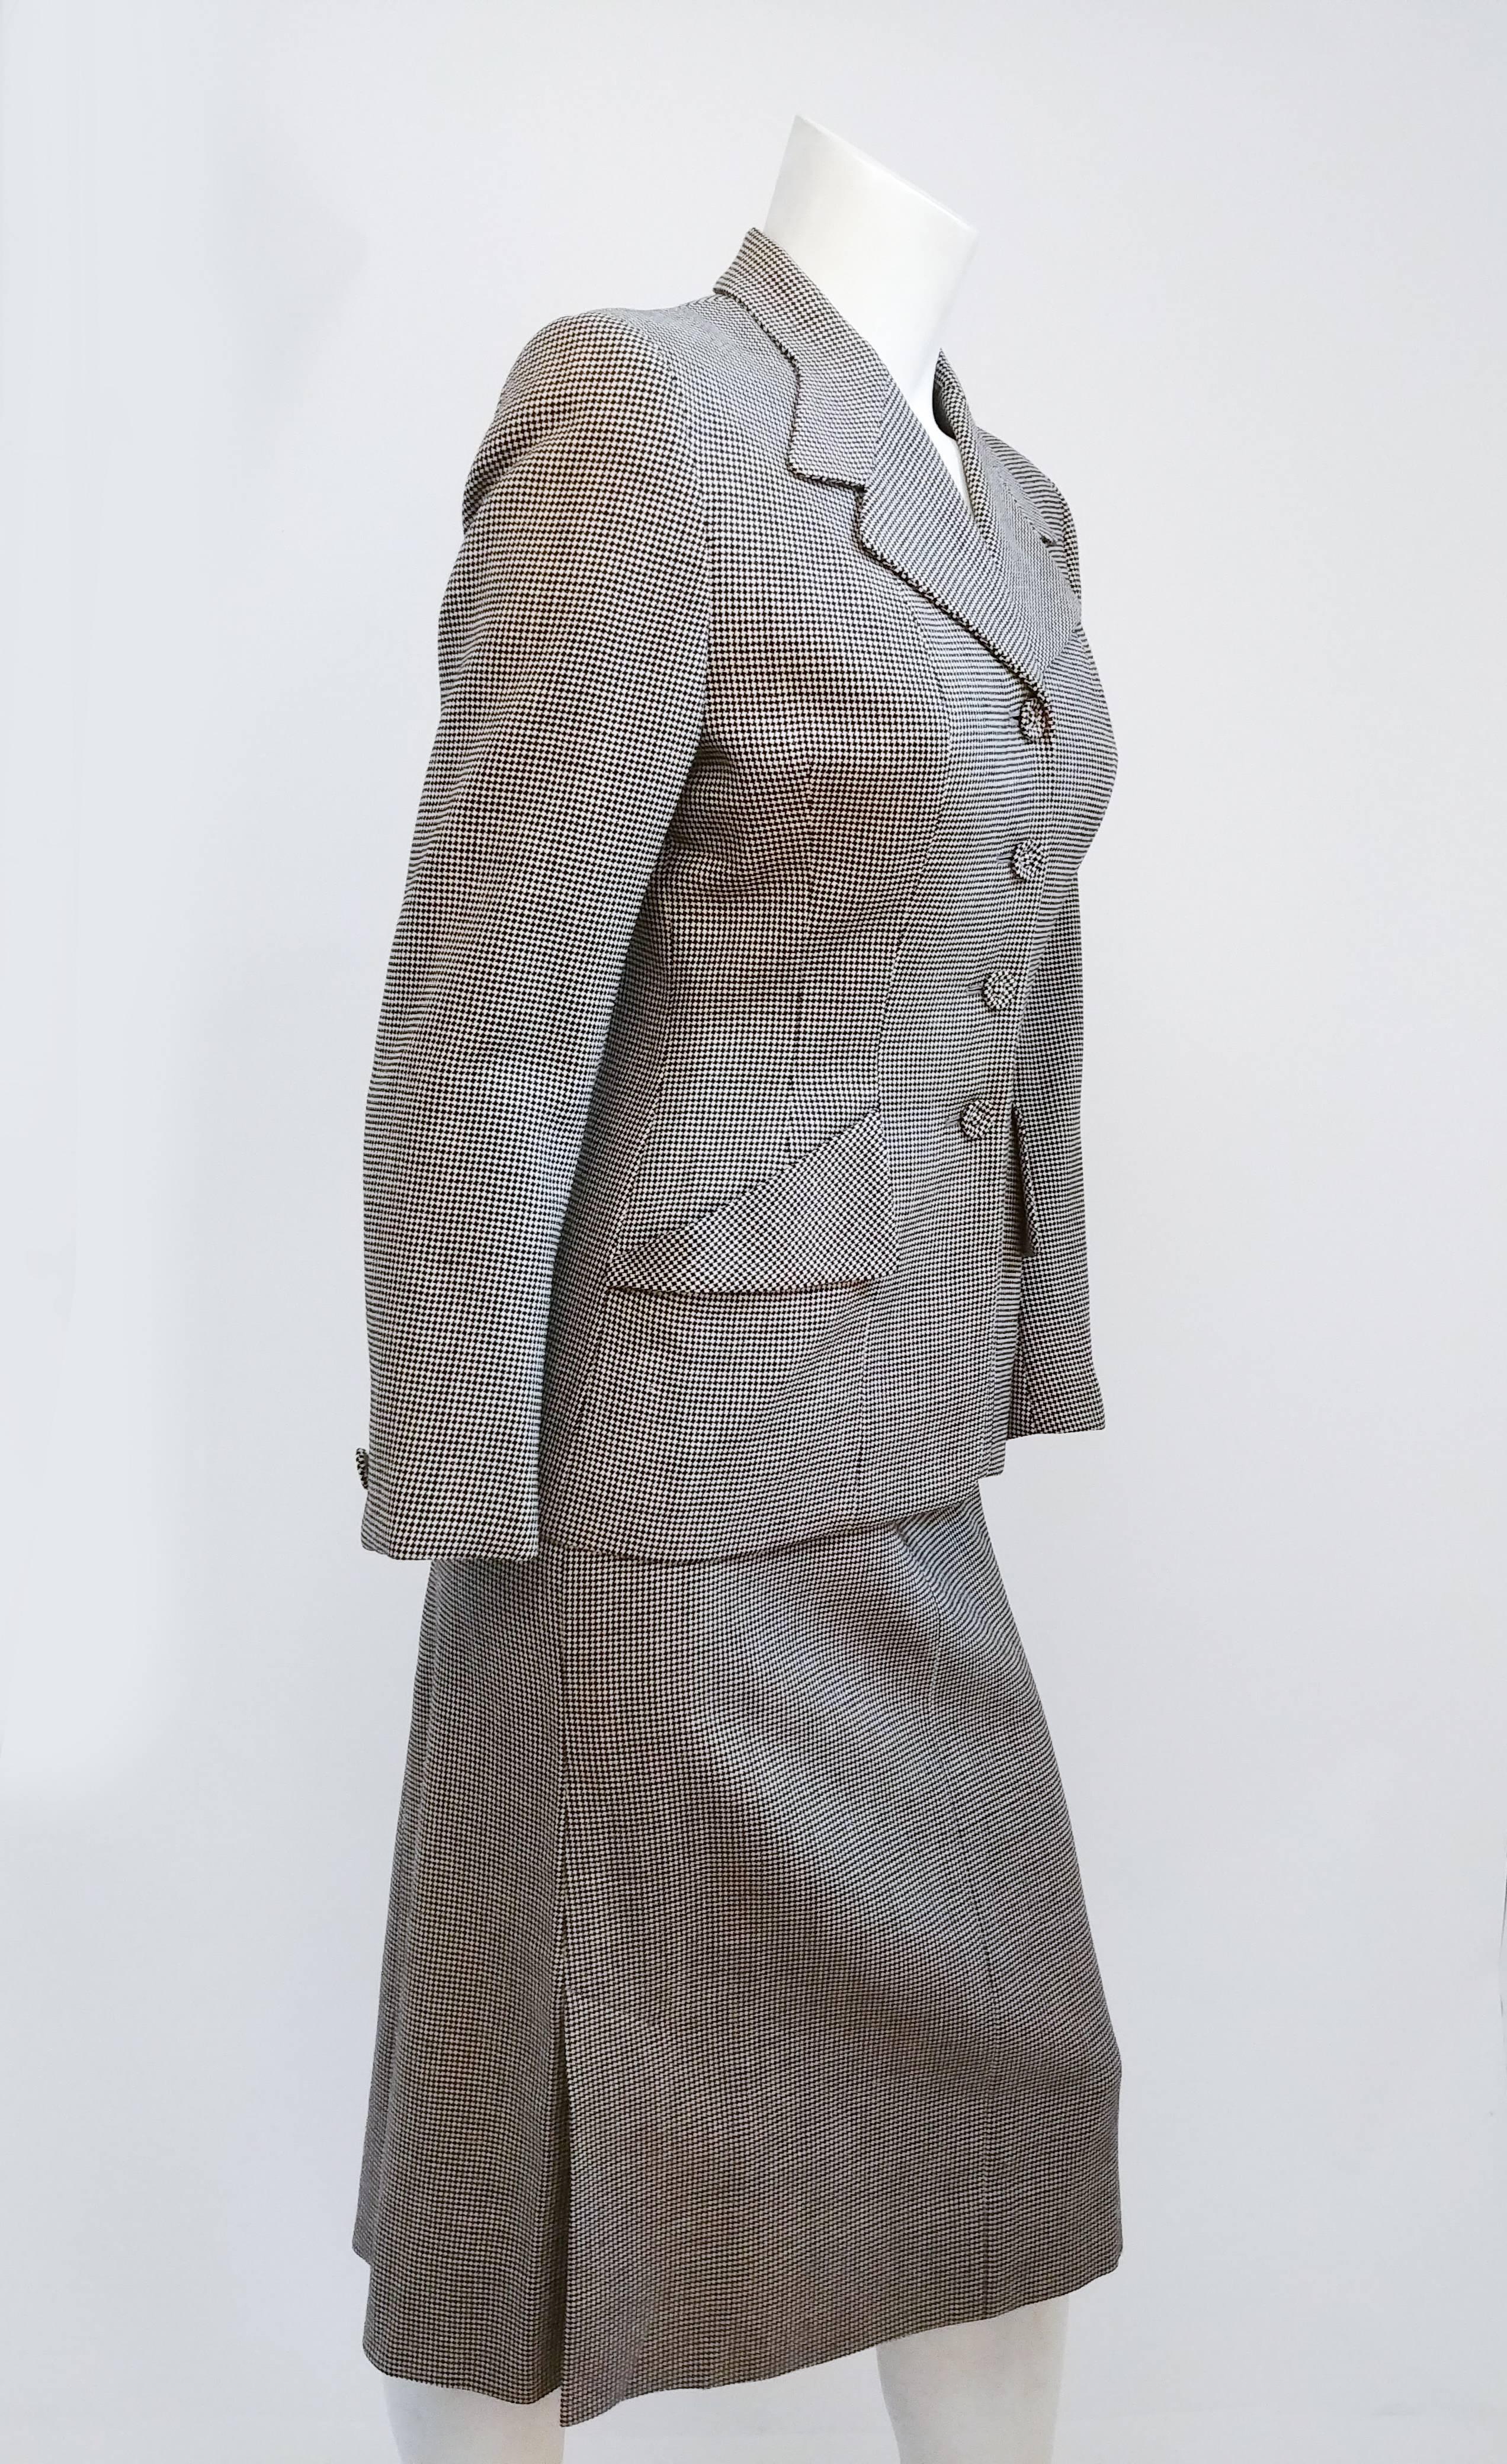 1940s Black & White Houndstooth Suit Set. Interesting notched lapel shape and shaped pocket details, buttons down front. Skirt zips up side, kick pleats at sides for ease of movement. 